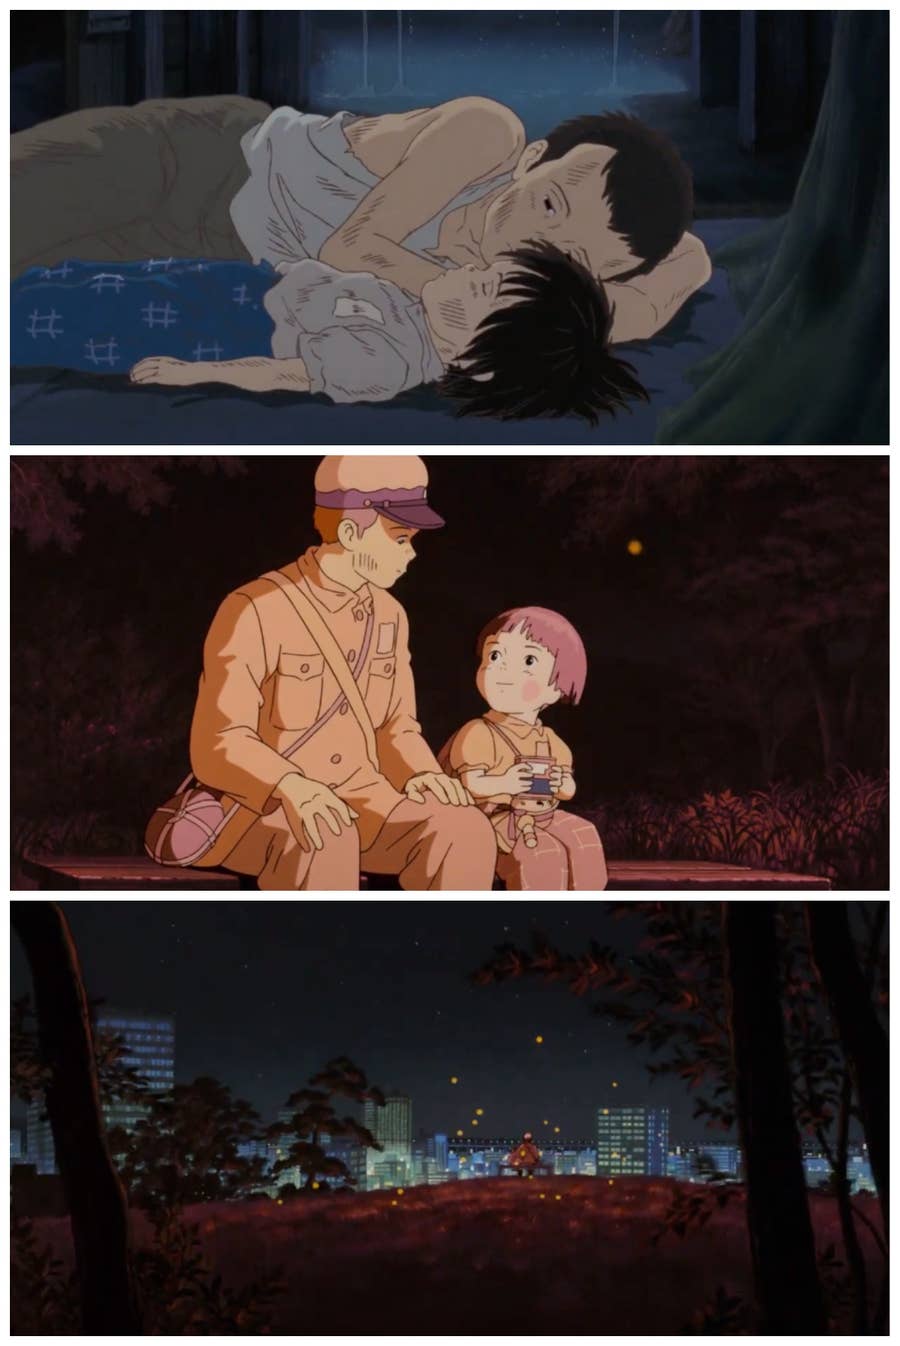 Grave Of The Fireflies Ending ( English subtitles ) 